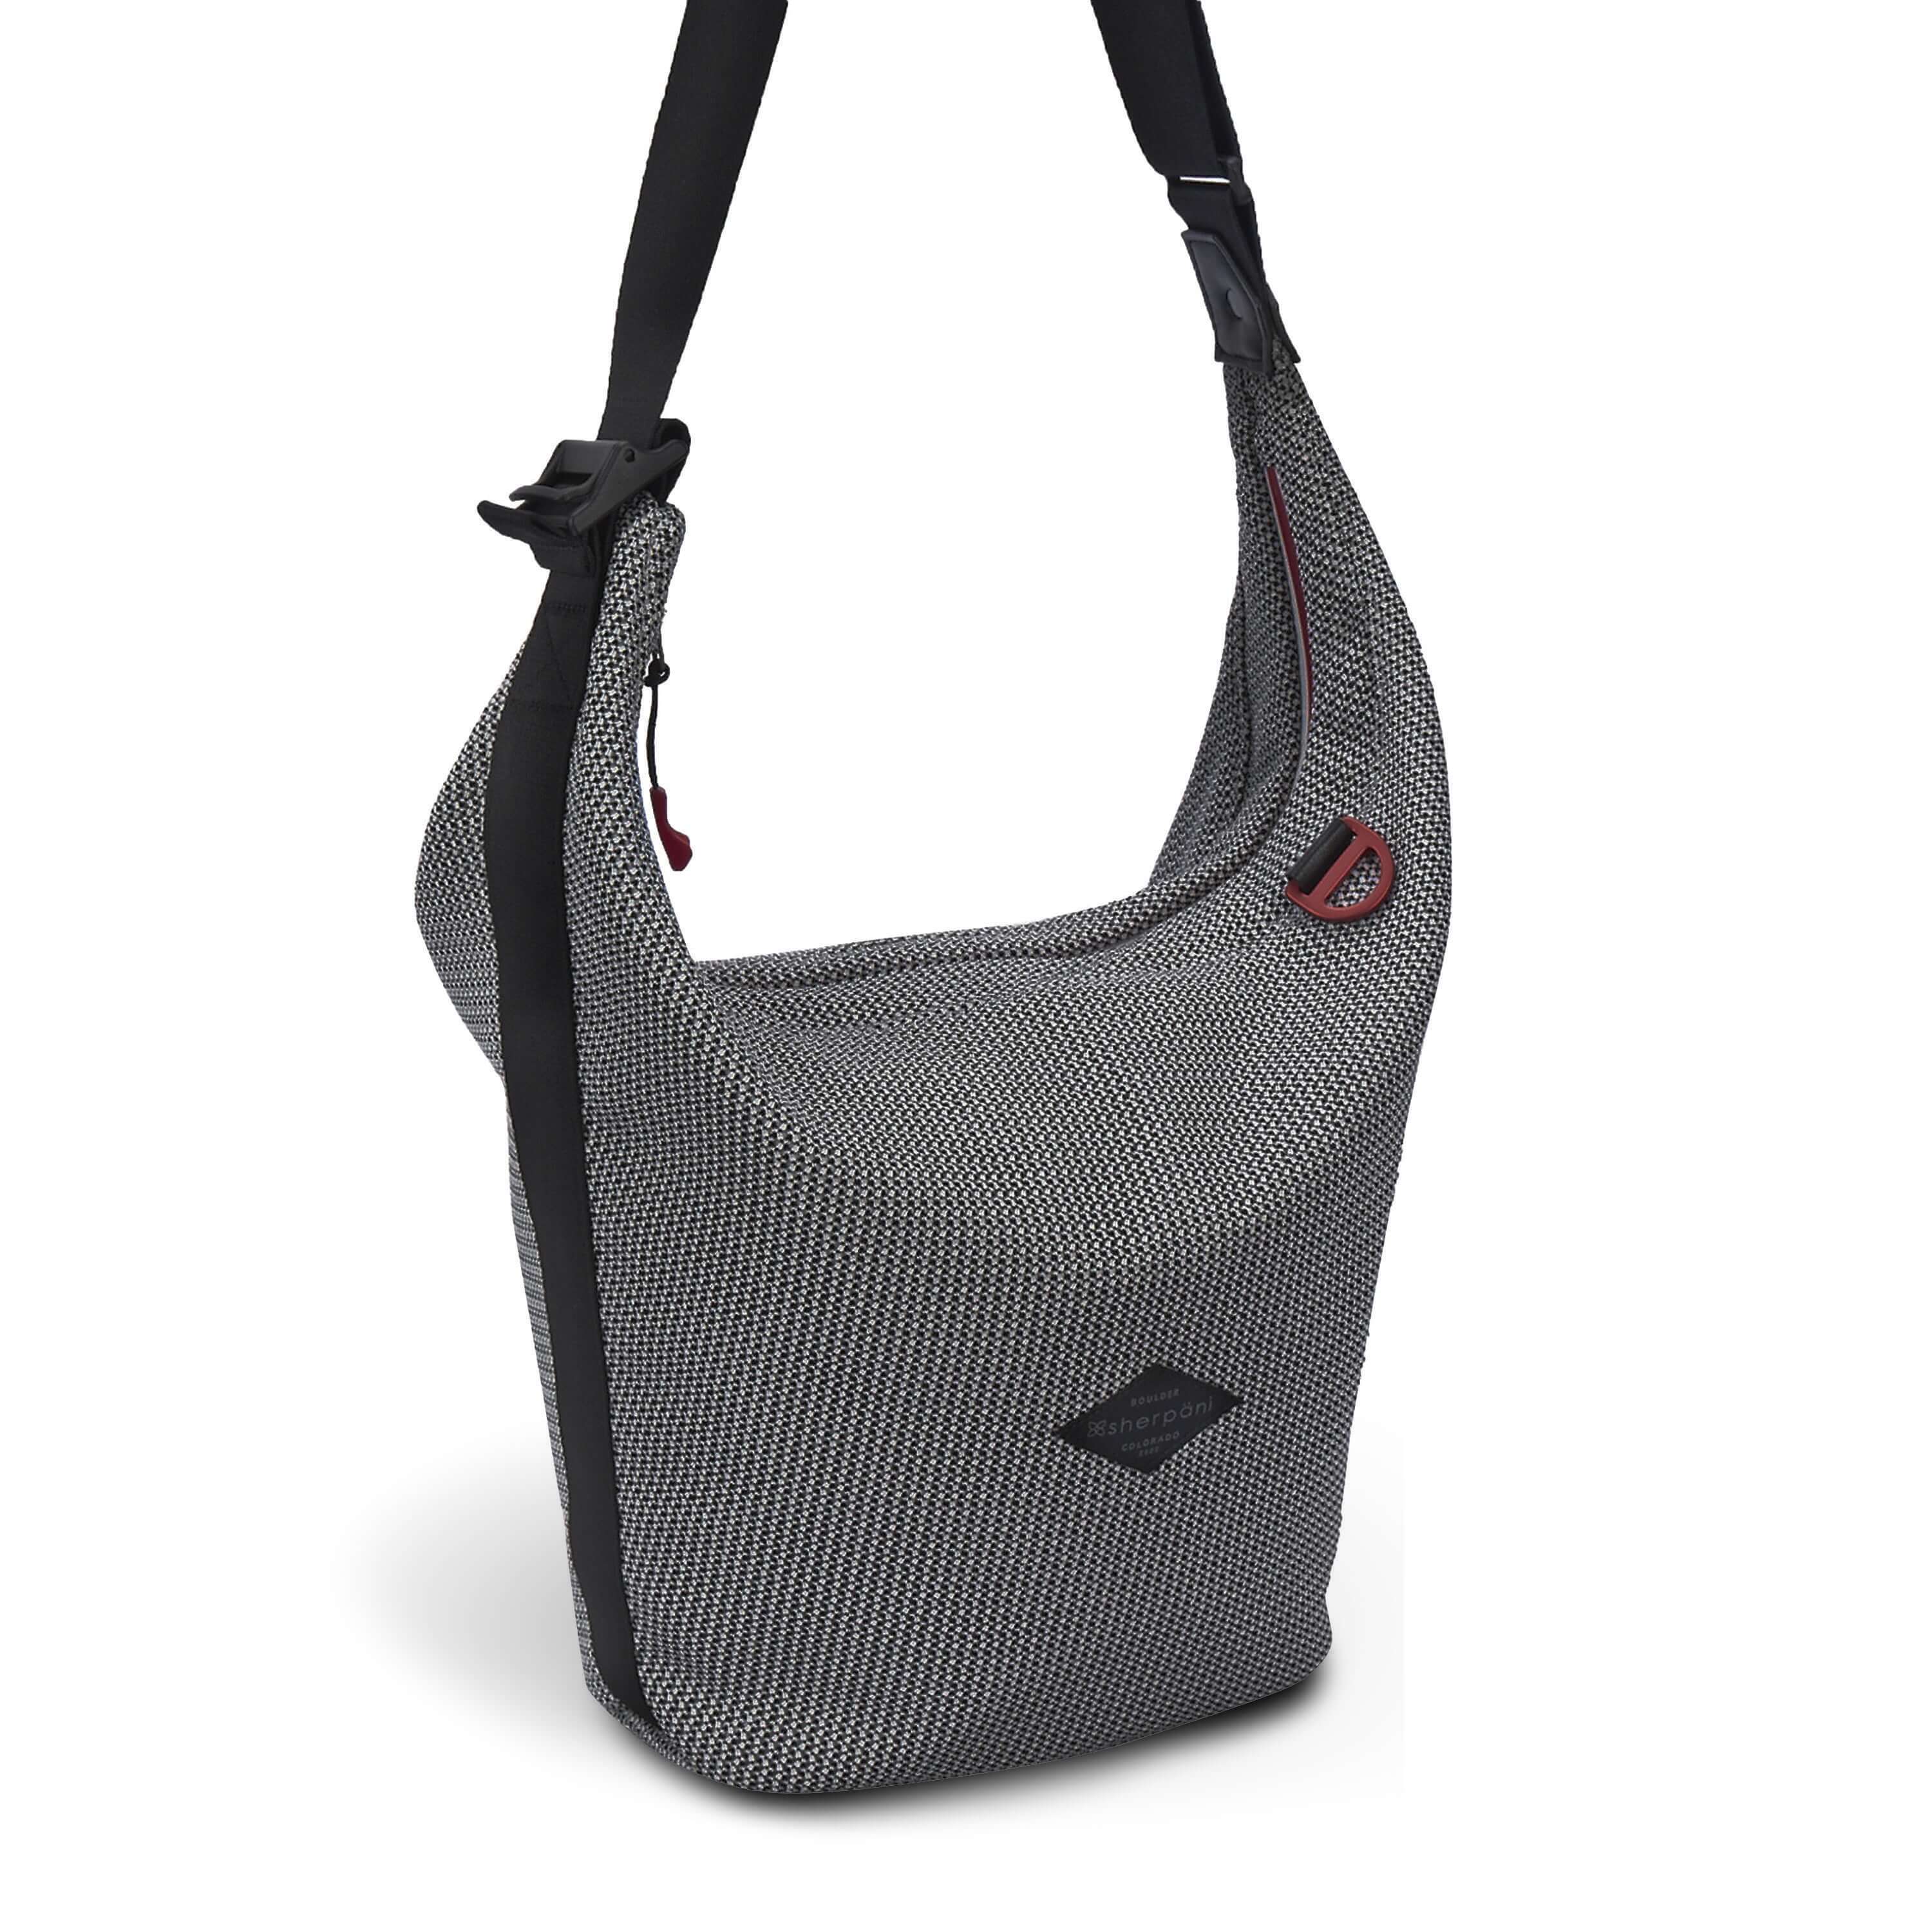 Angled front view of Sherpani mesh crossbody, the Payton. The bag has a black and white mesh pattern and features red pops of color on the accent buckle and easy-pull zipper. It has a black adjustable crossbody strap with a cam buckle.